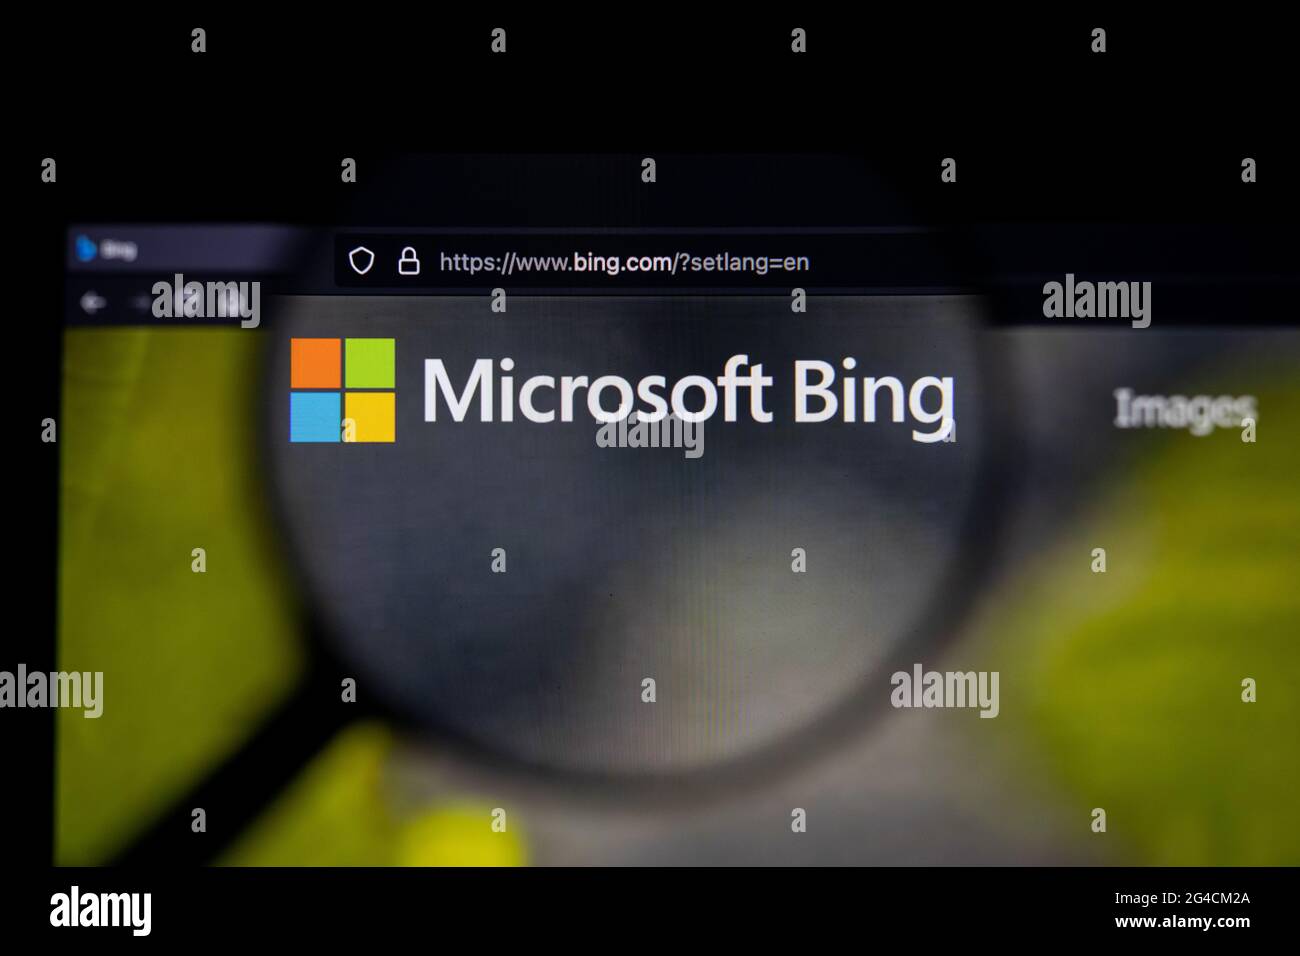 Bing search engine logo on a website, seen on a computer screen through a magnifying glass. Stock Photo